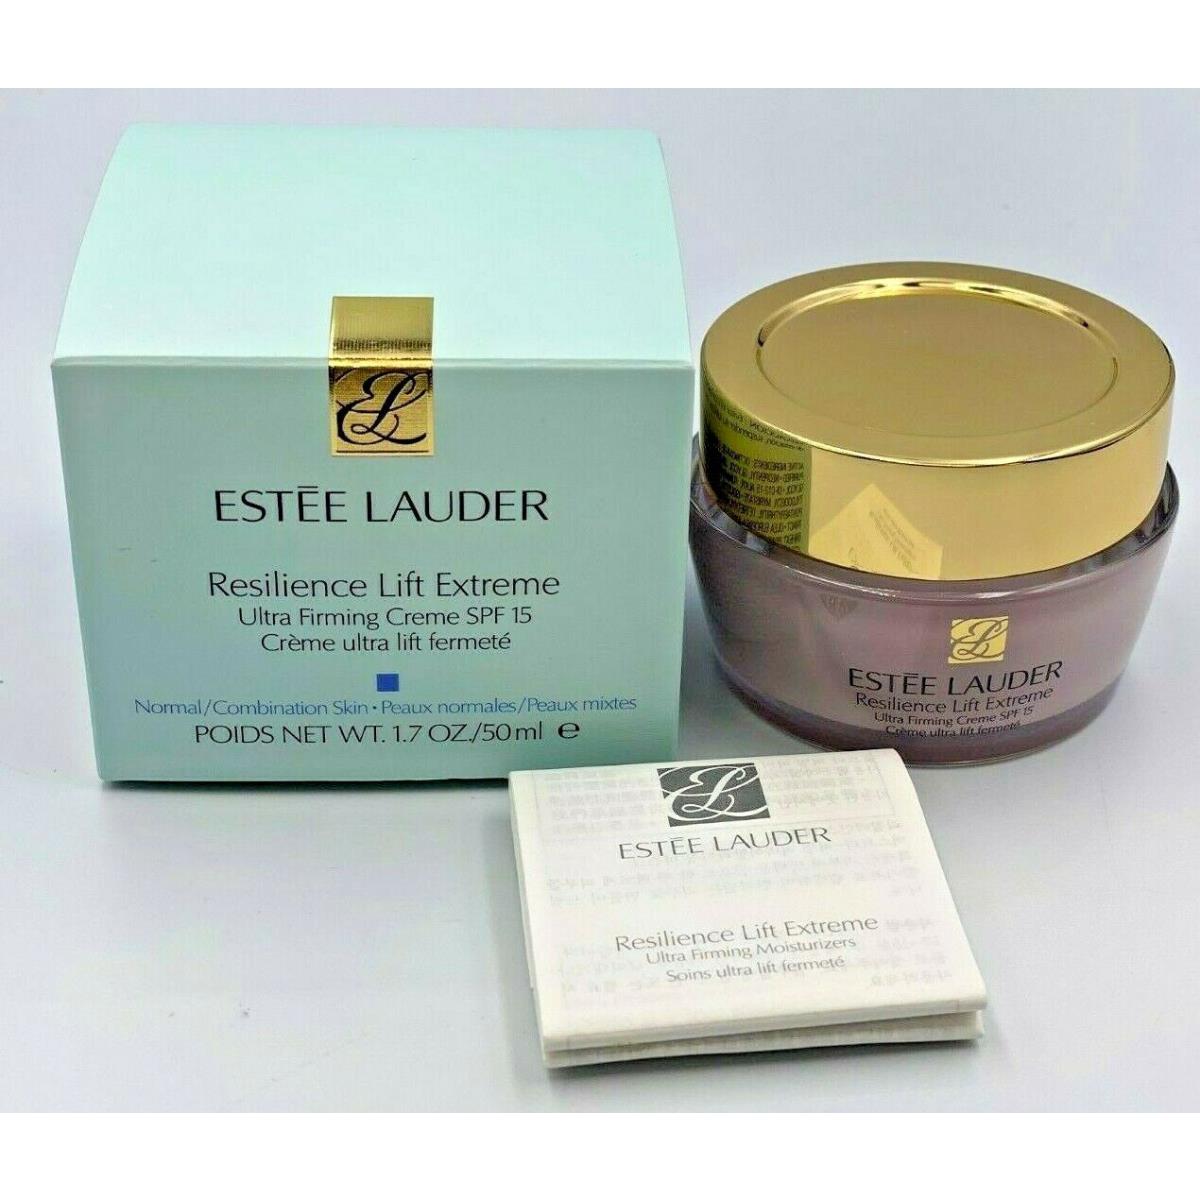 Estee Lauder Resilience Lift Extreme Ultra Firming Creme 1.7oz Rare